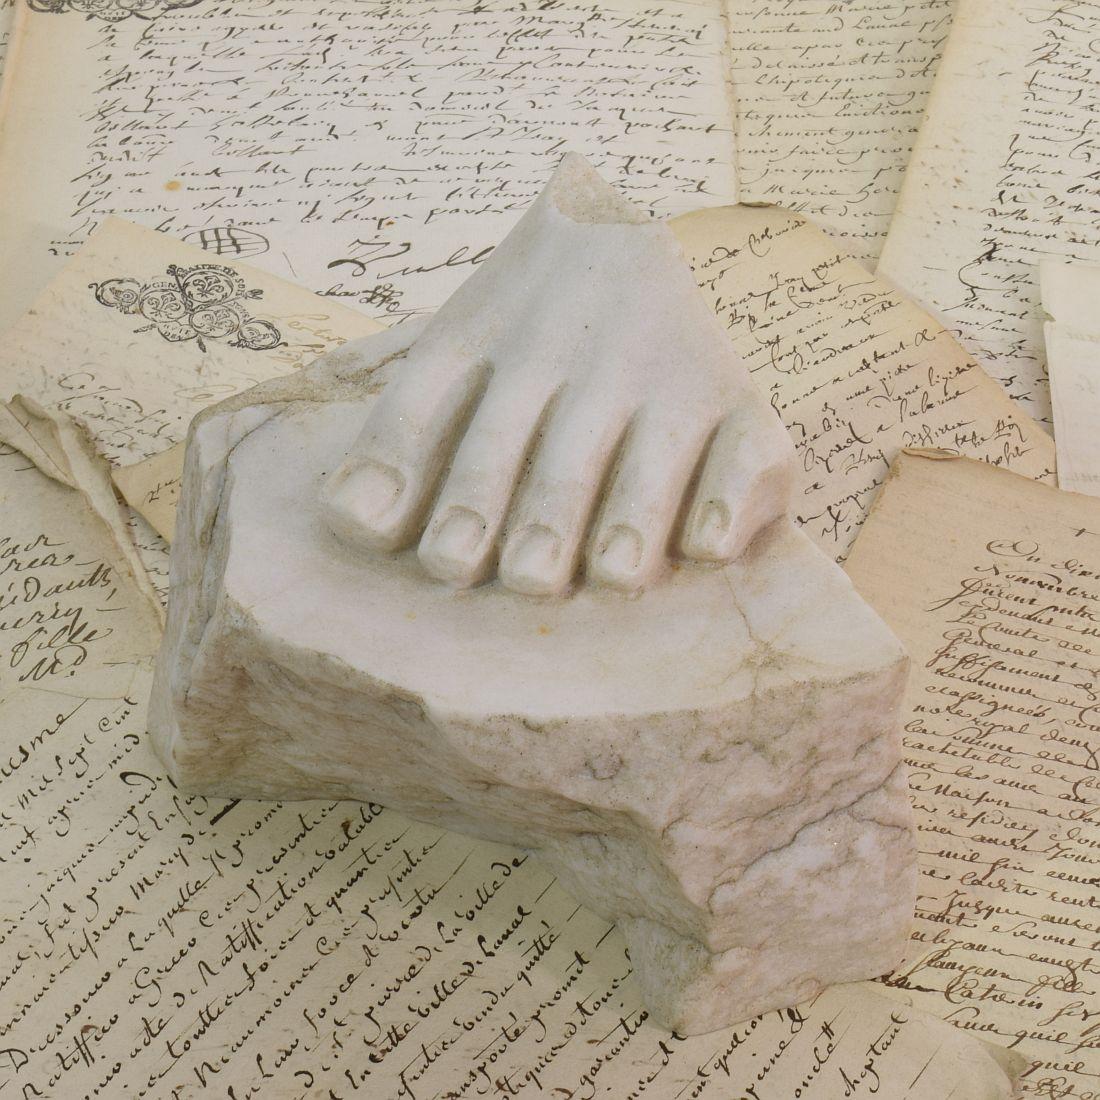 Hand-Carved 18th-19th Century Italian Marble Fragment of a Foot